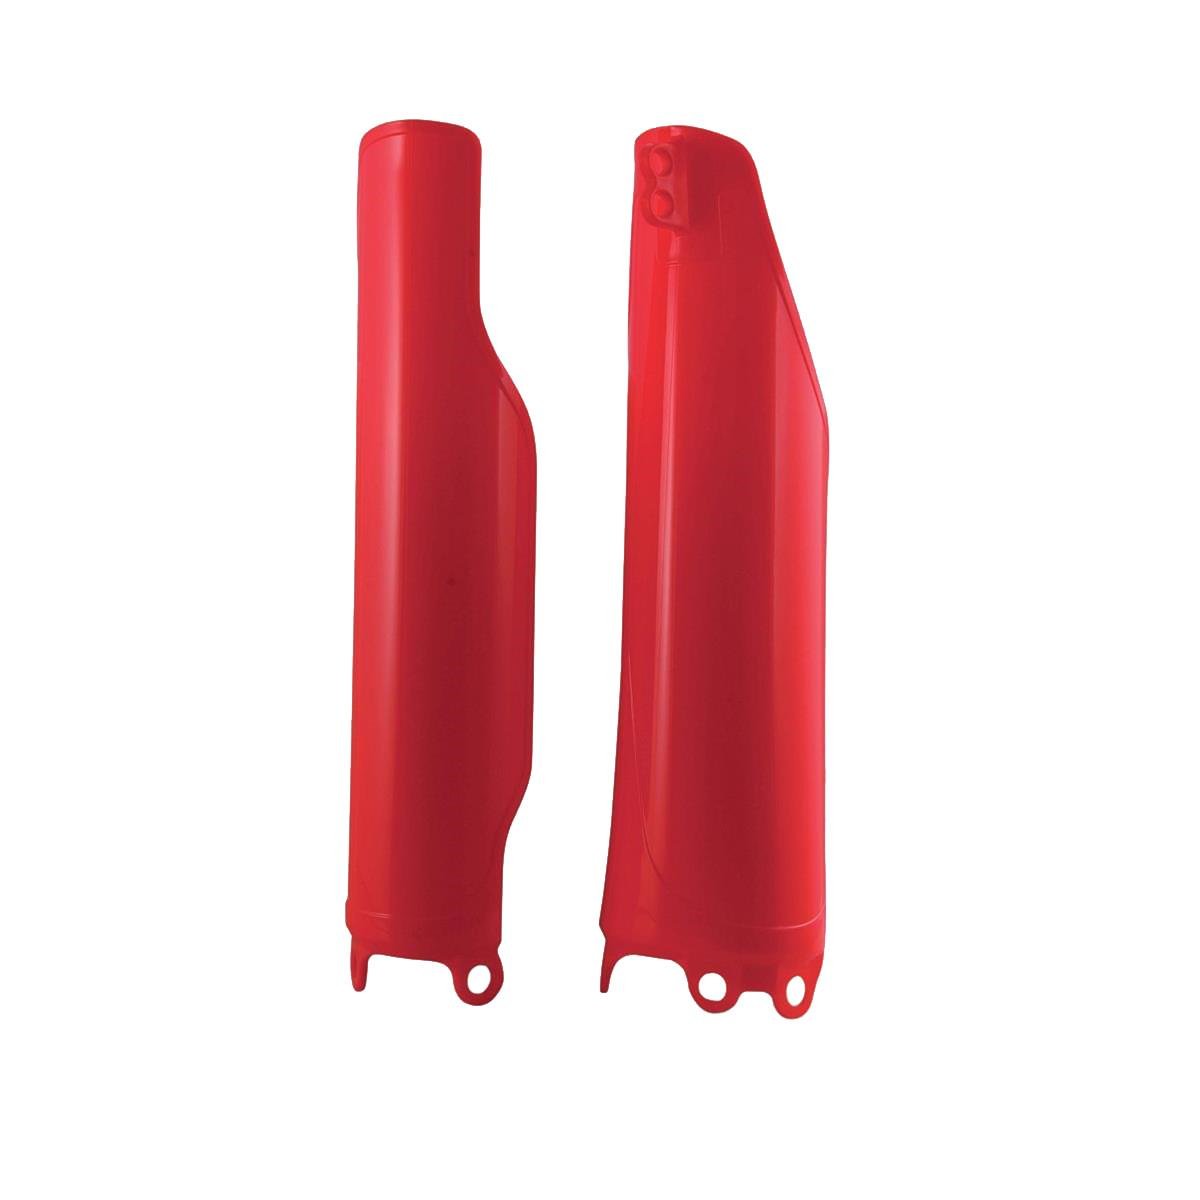 Acerbis Lower Fork Covers  Honda CR 125/250, CRF 250/450 R/X, Red